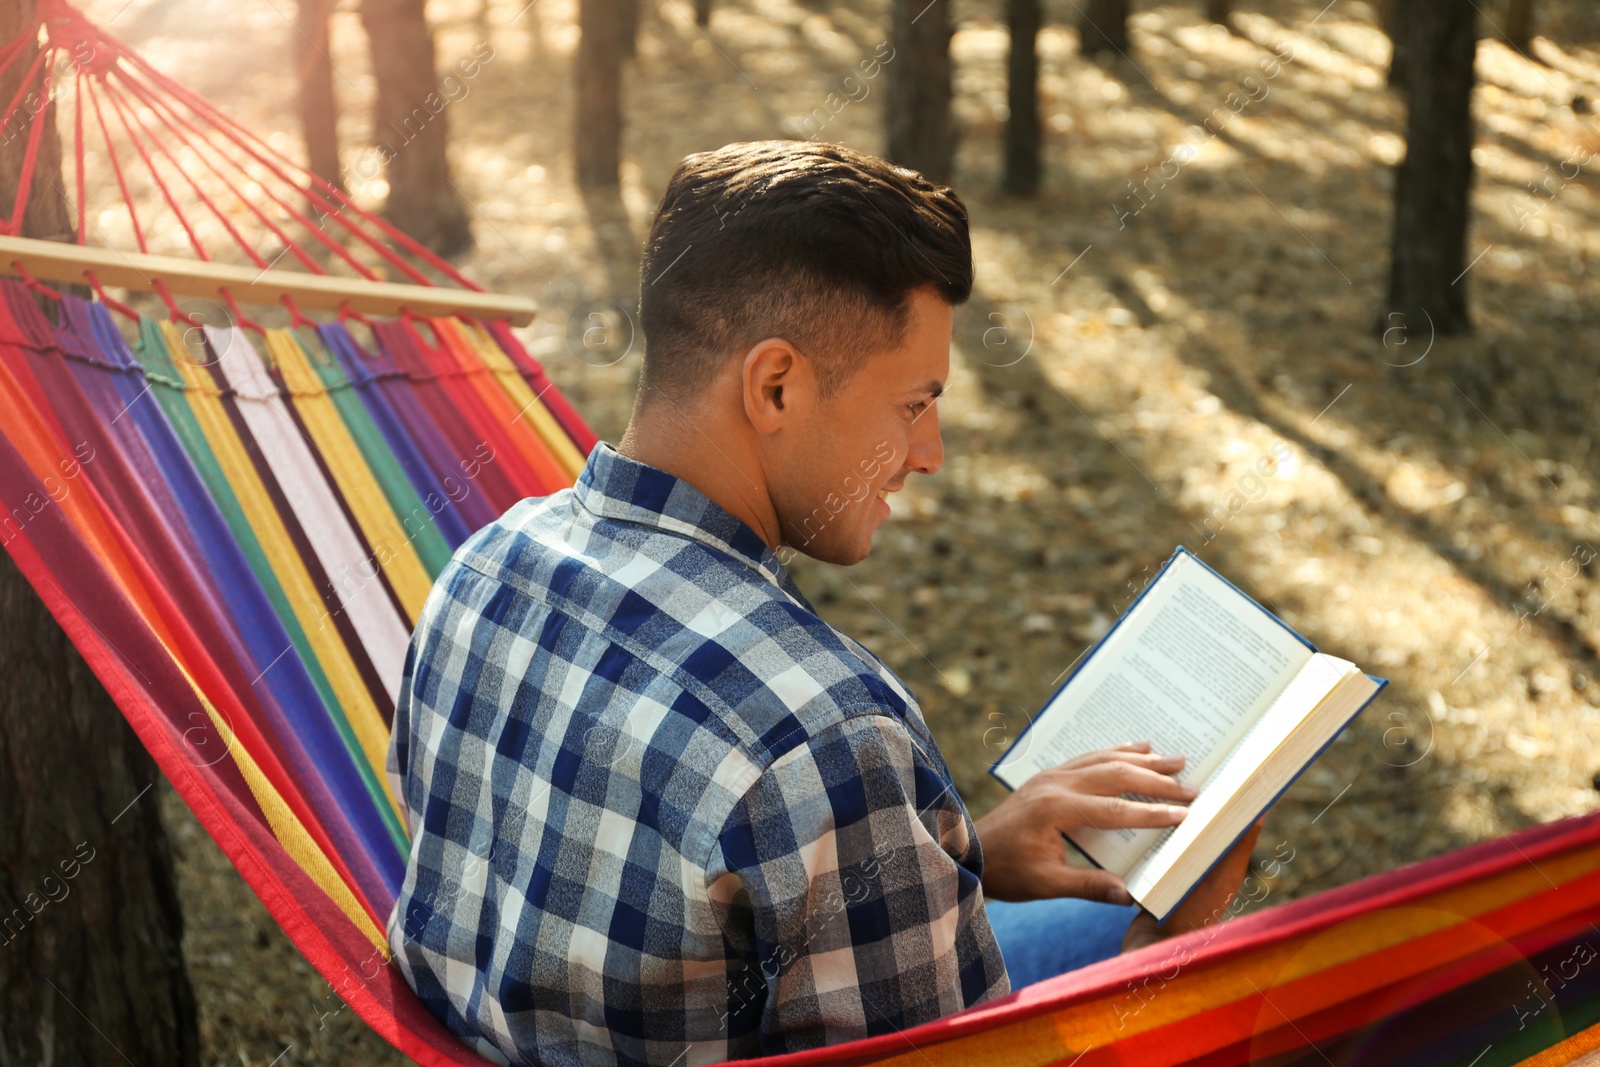 Photo of Man with book relaxing in hammock outdoors on summer day